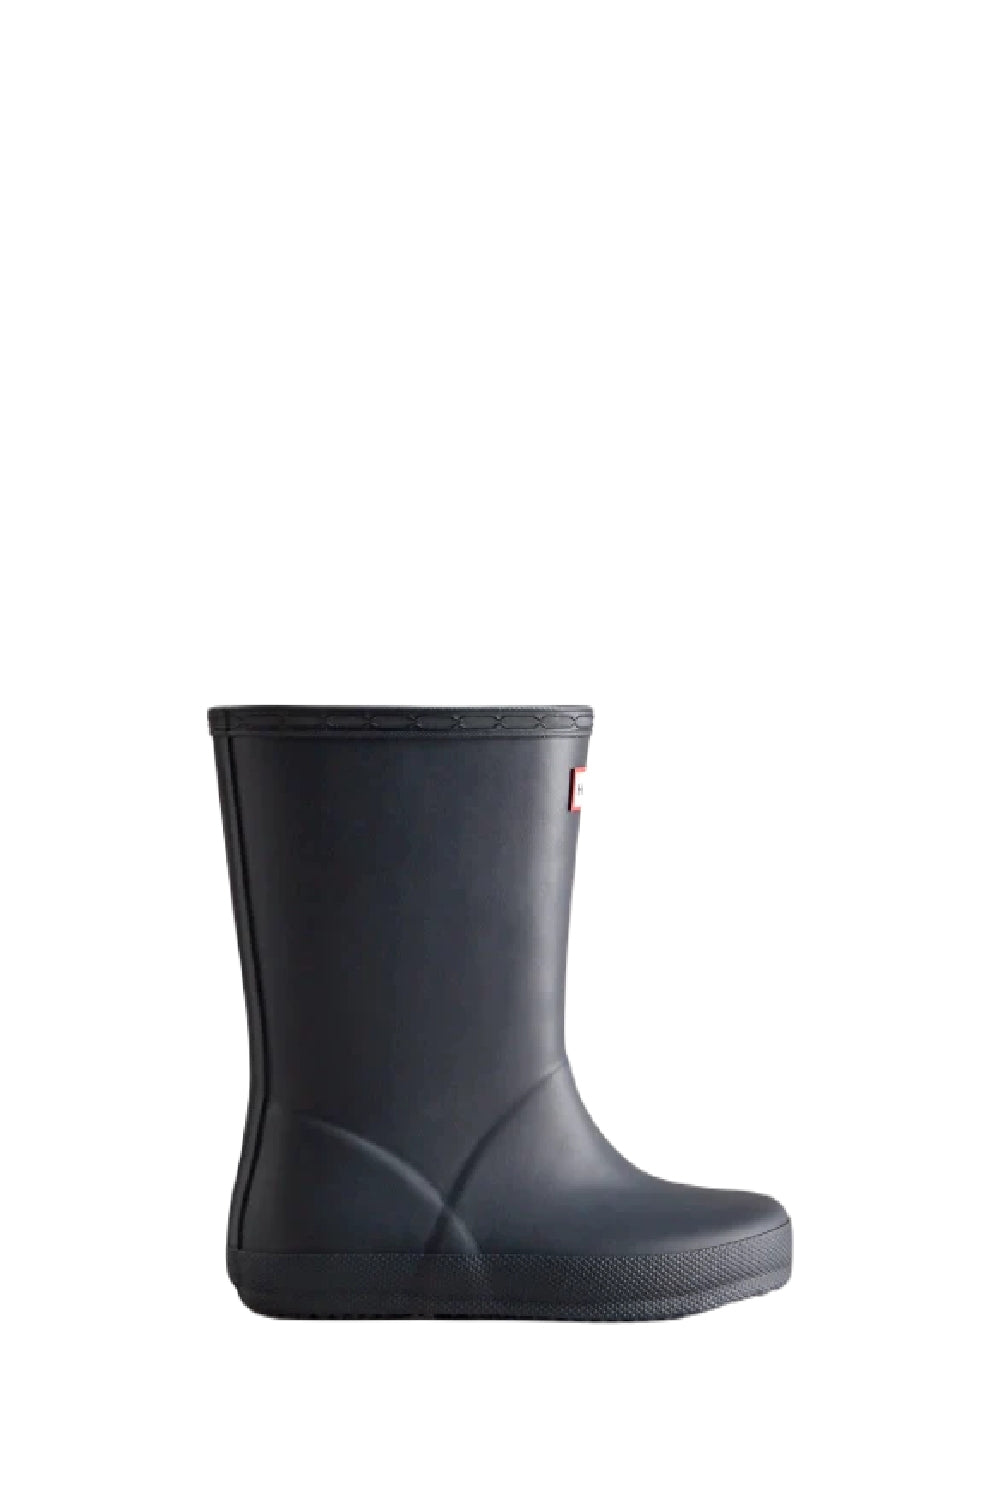 Hunter Kids First Classic Wellington Boots in Navy